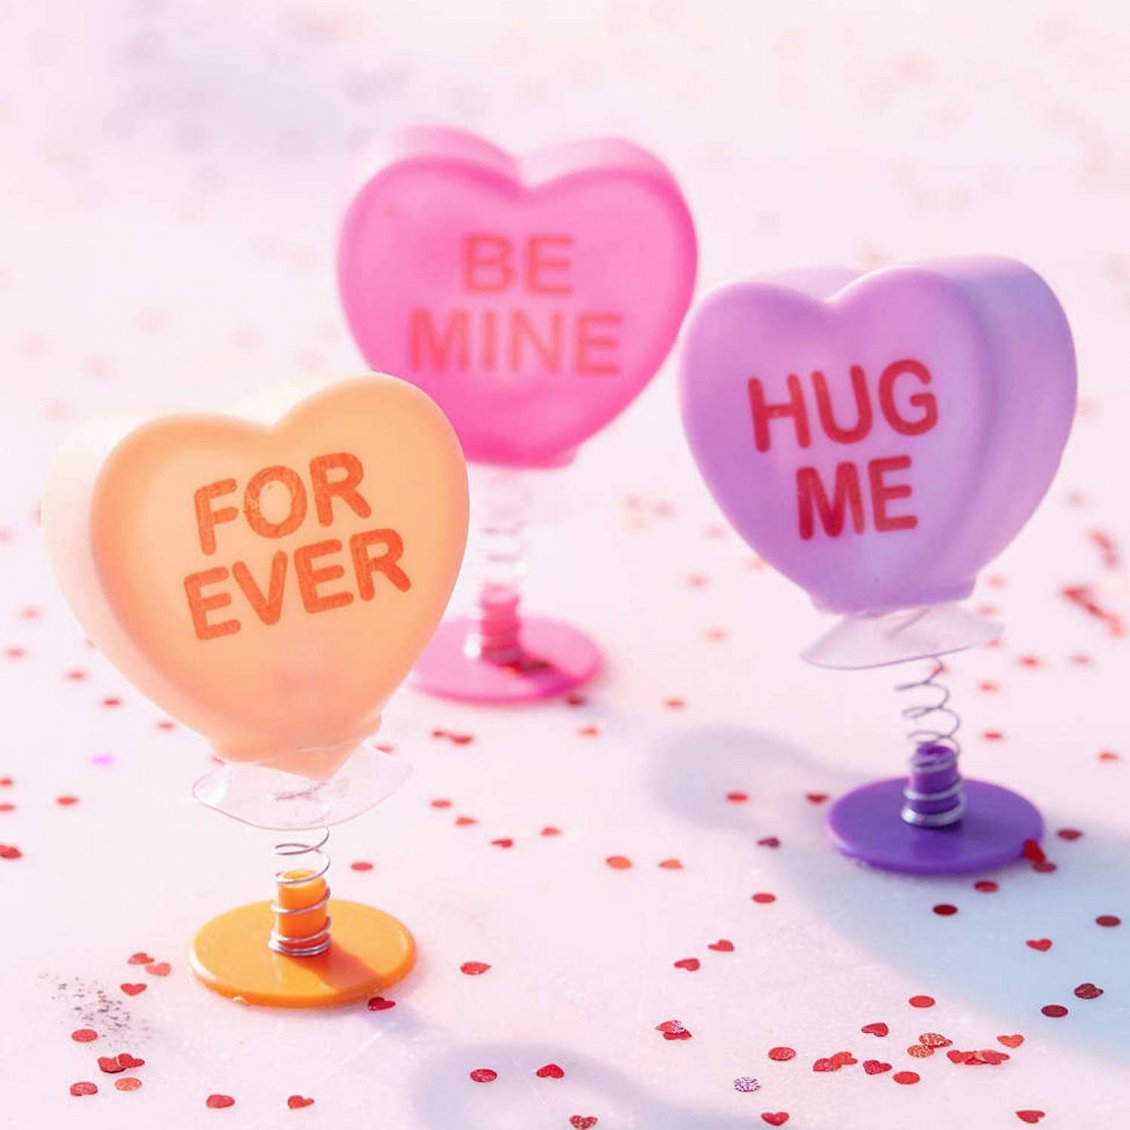 Download Wallpaper Be mine for ever - Hug me and love me - Happy Valentines Day